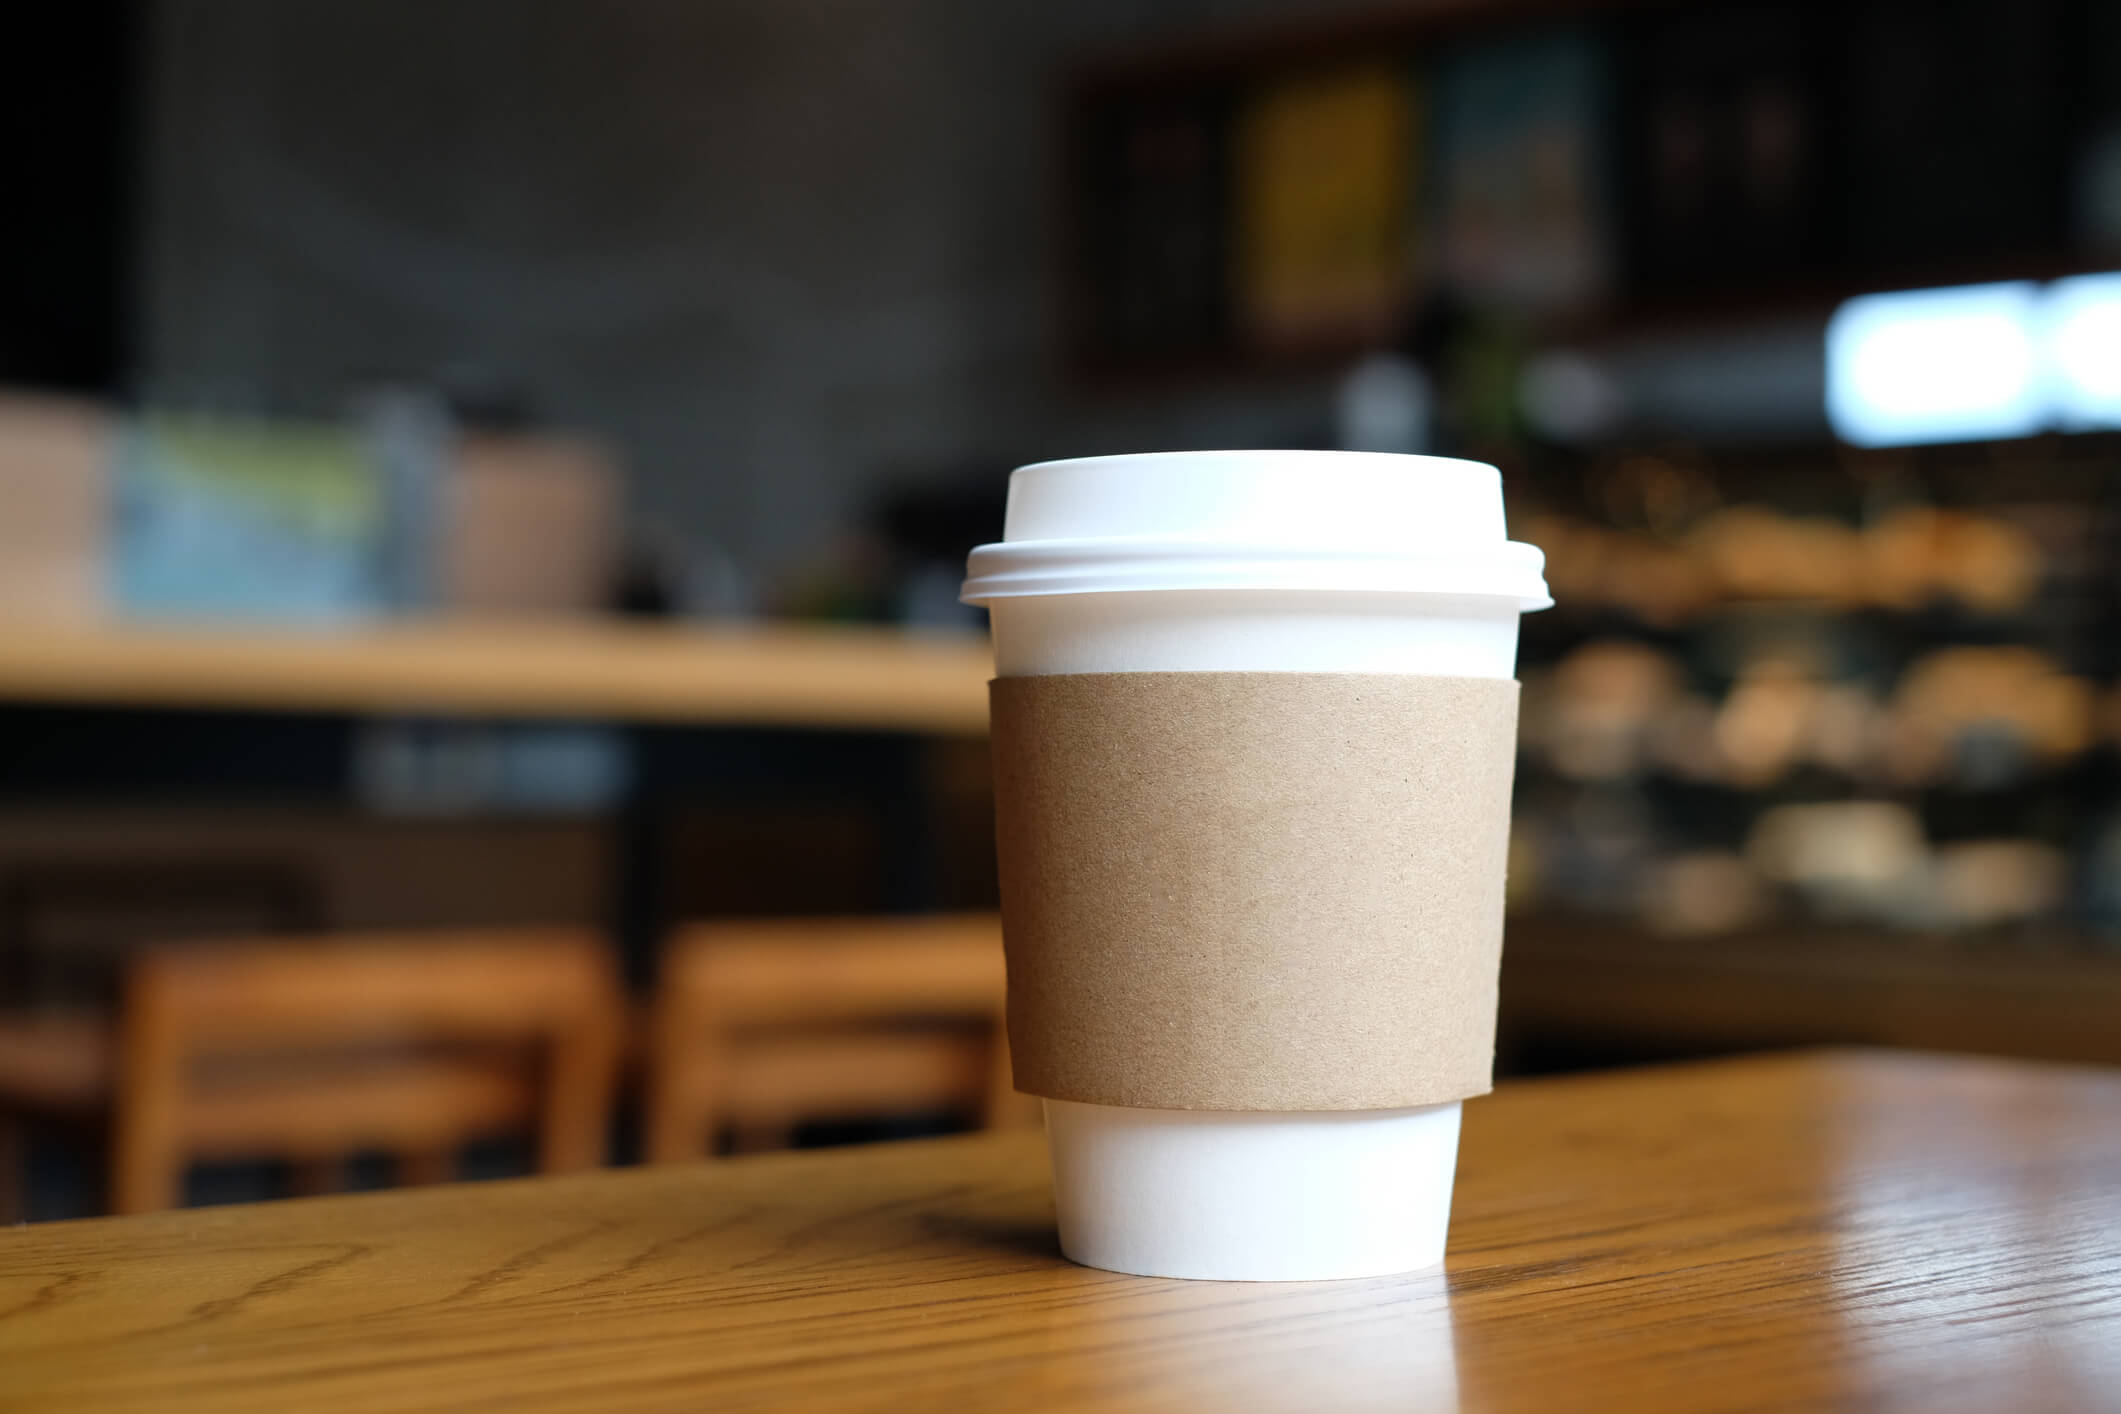 A to-go coffee cup on a wooden table, with the blurred interior coffee shop as the background
